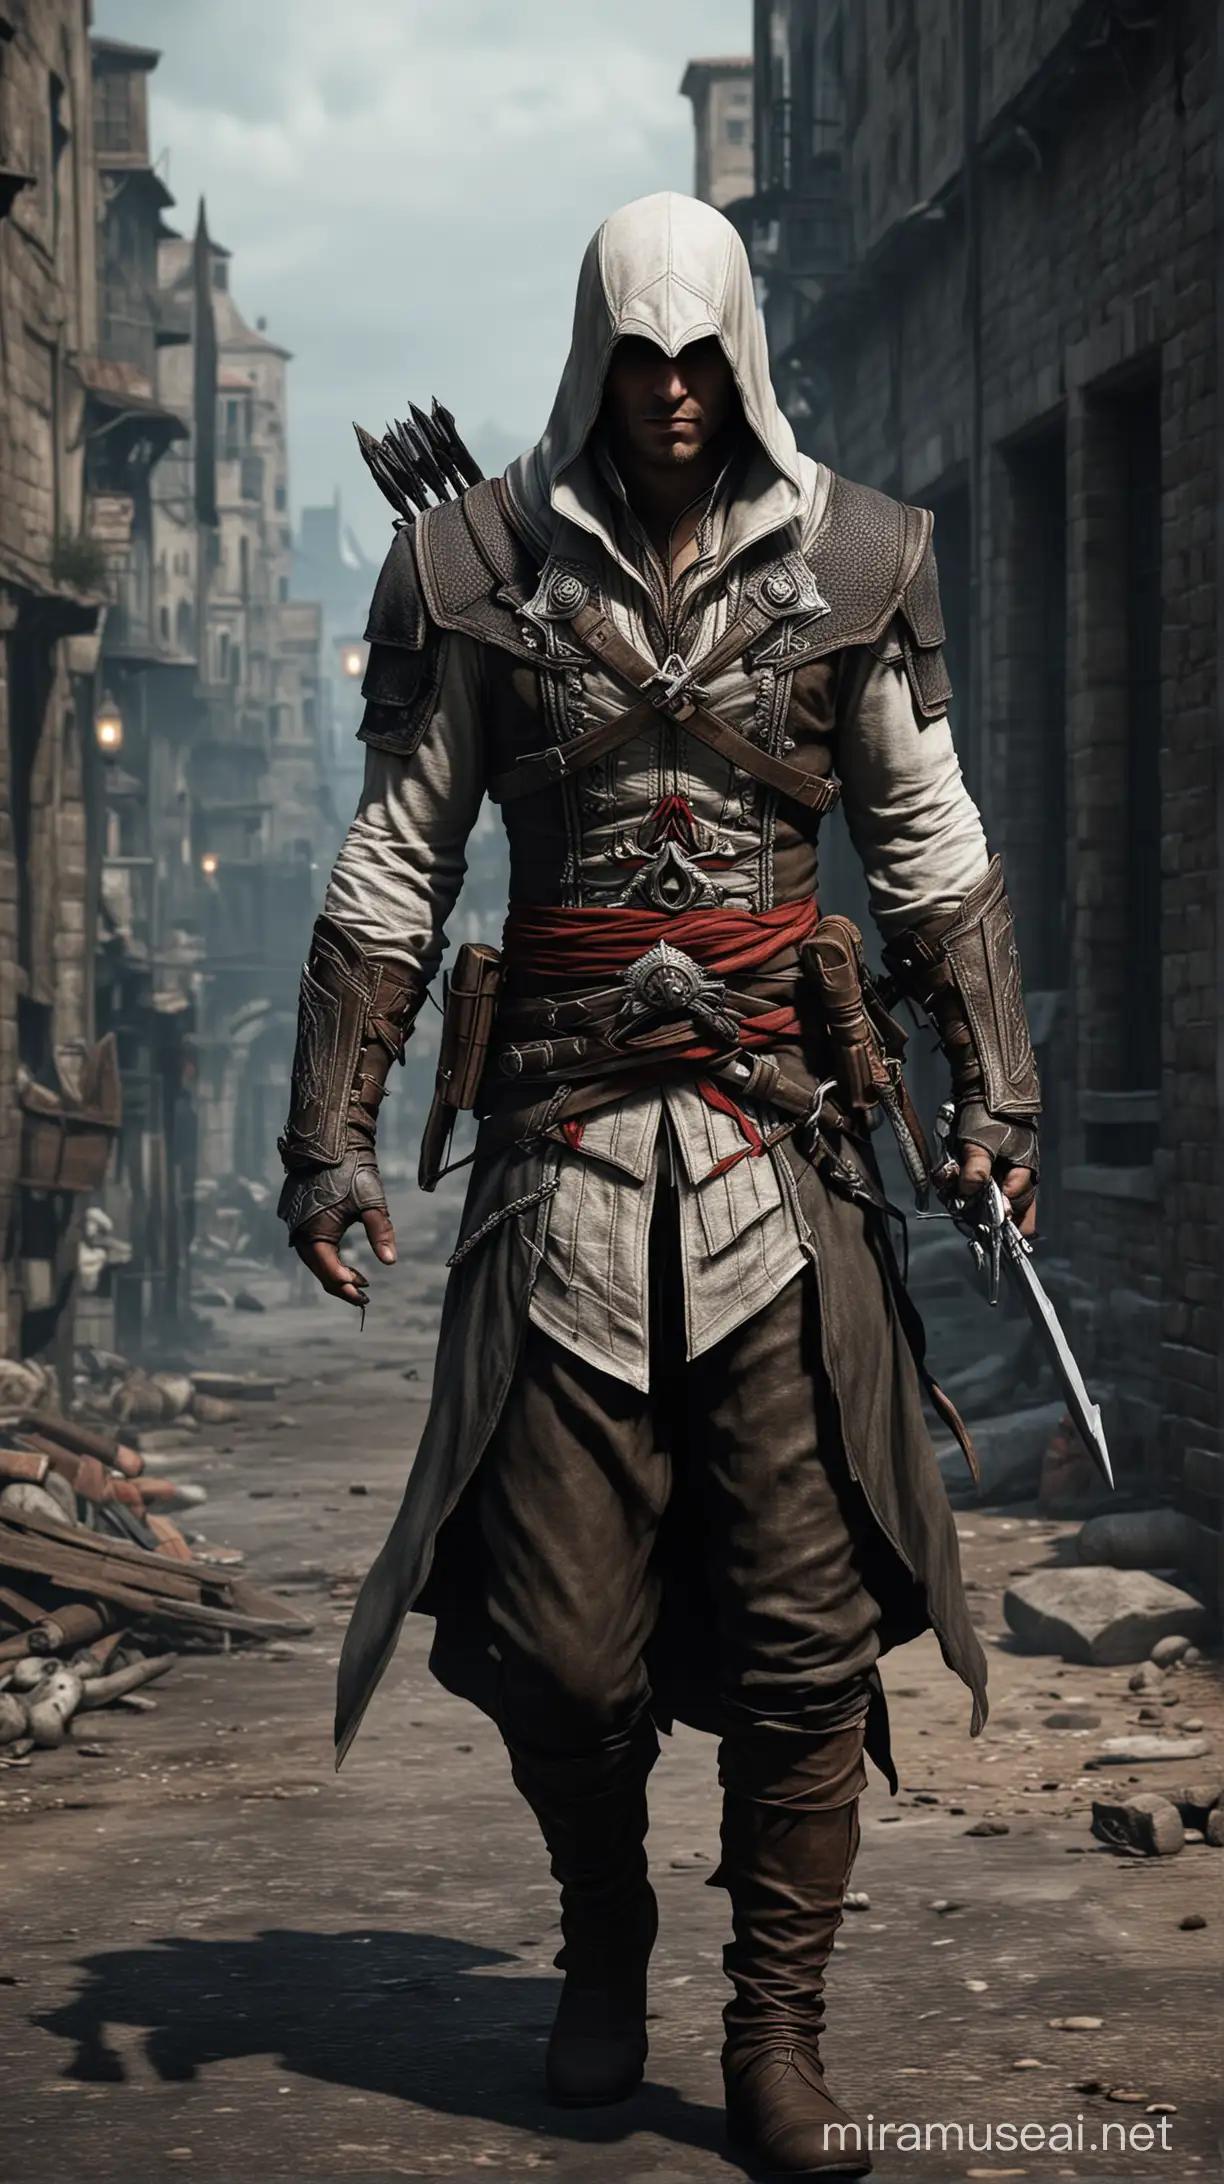 Stealthy Assassin in Shadowy Realism